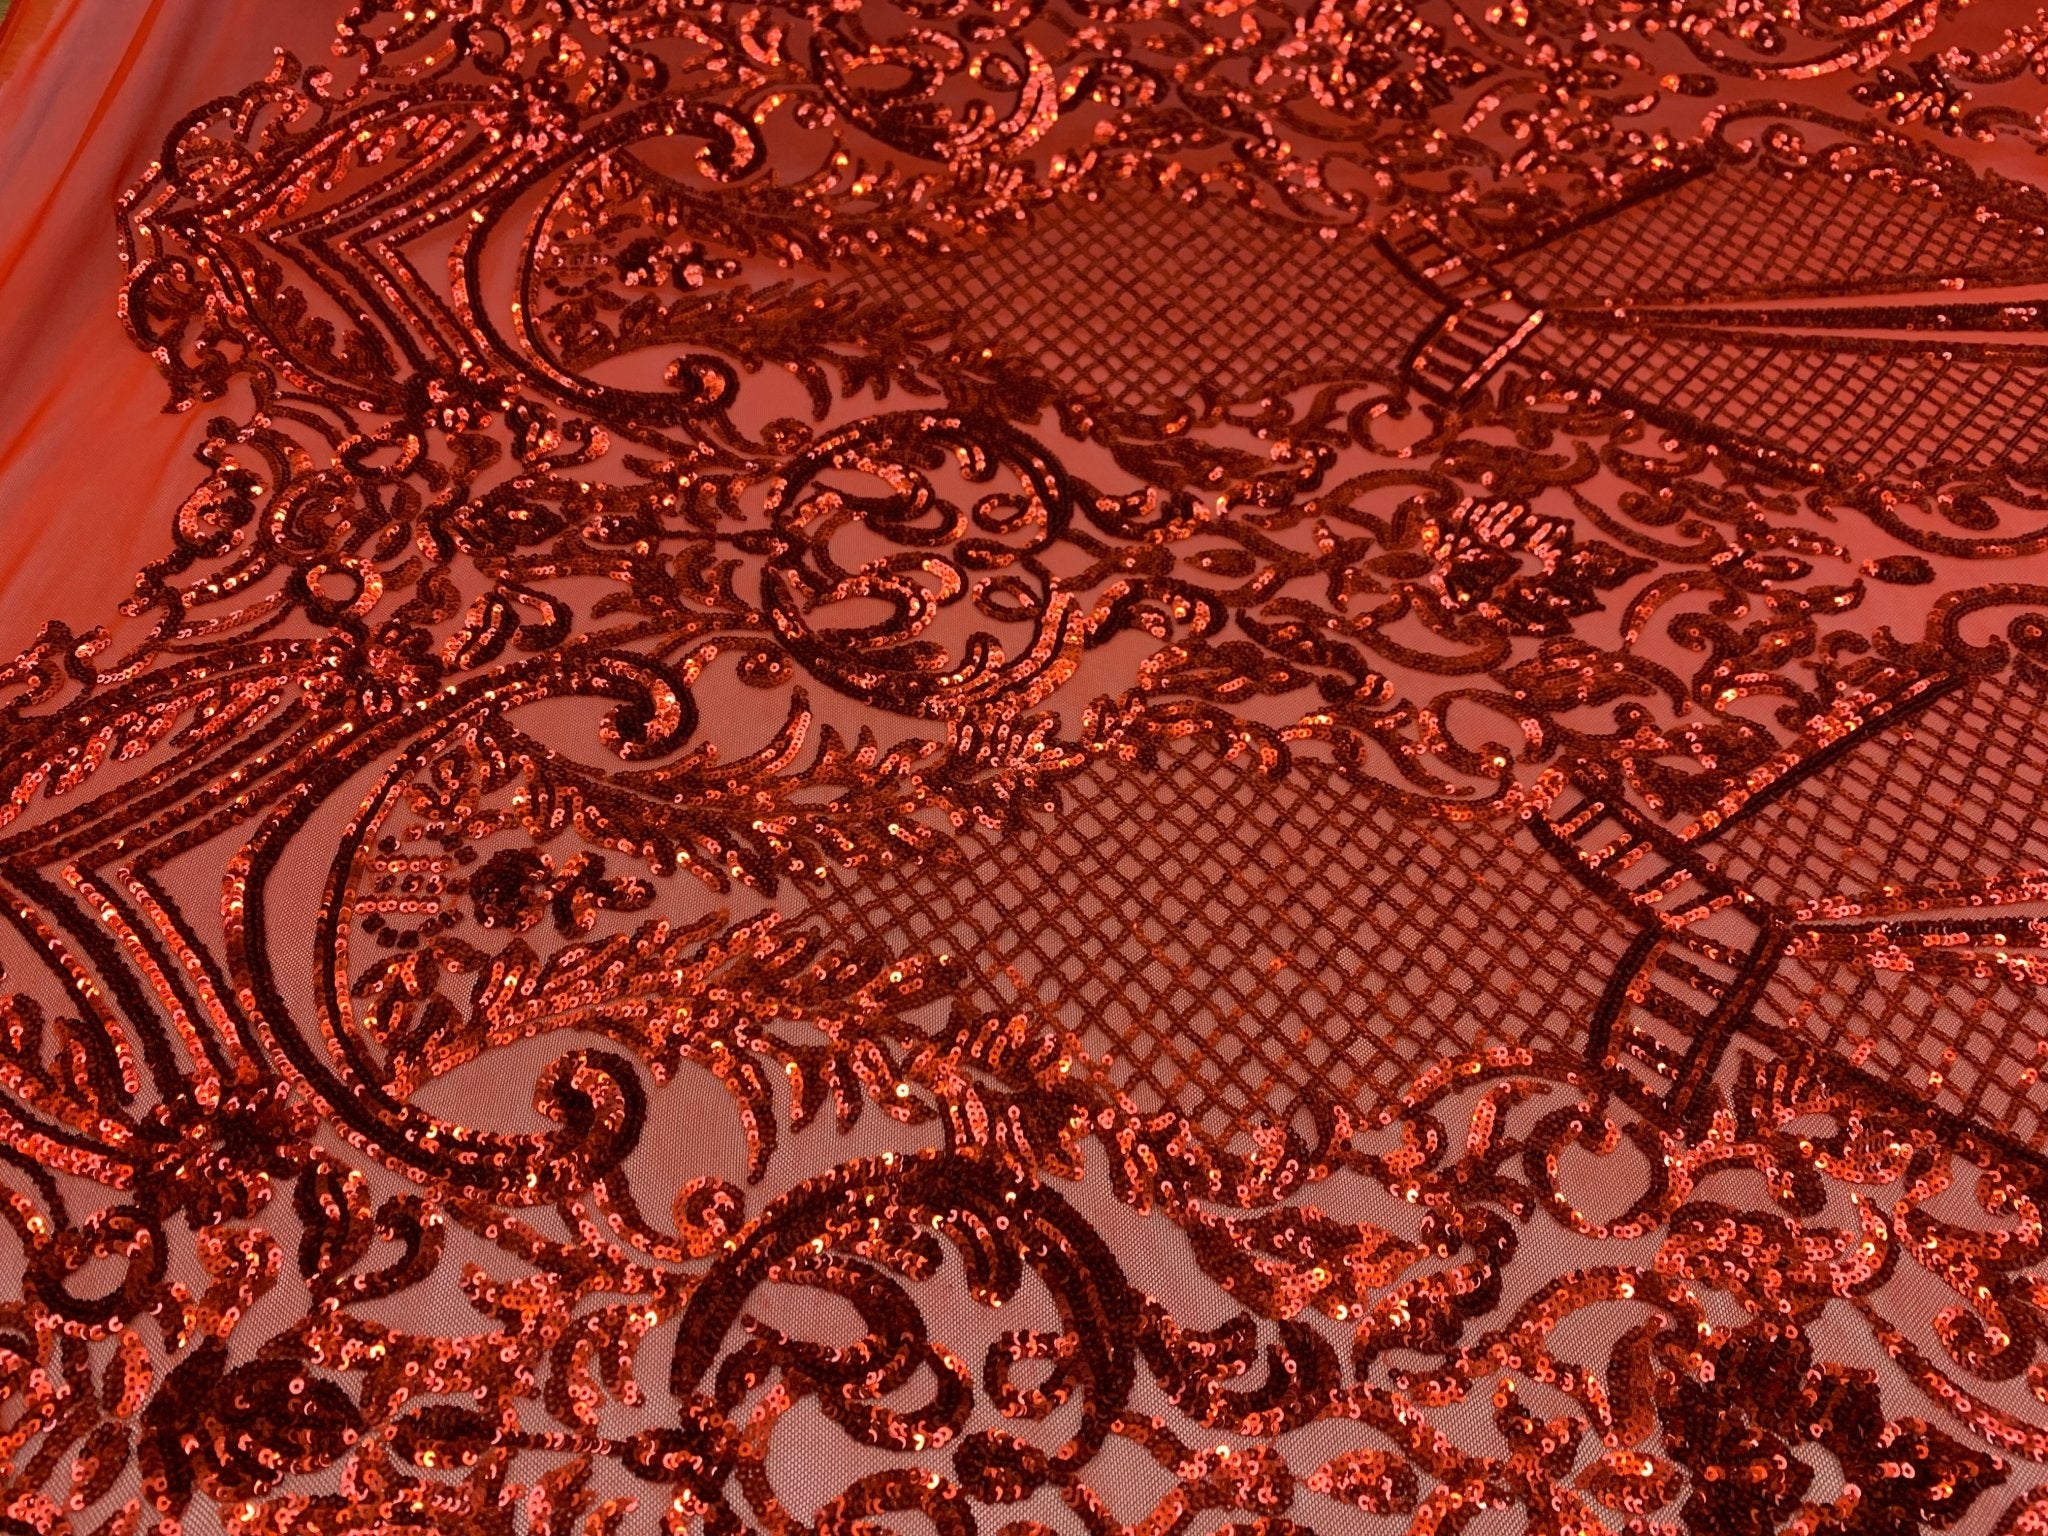 BY THE YARD/ Geometric Design Mesh Lace Fabric Sequins 4 Way Stretch On A Red Mesh/Lace Embroider (Red) Prom/Gowns Dress/Veil/ TableclothsICE FABRICSICE FABRICSBY THE YARD/ Geometric Design Mesh Lace Fabric Sequins 4 Way Stretch On A Red Mesh/Lace Embroider (Red) Prom/Gowns Dress/Veil/ Tablecloths ICE FABRICS